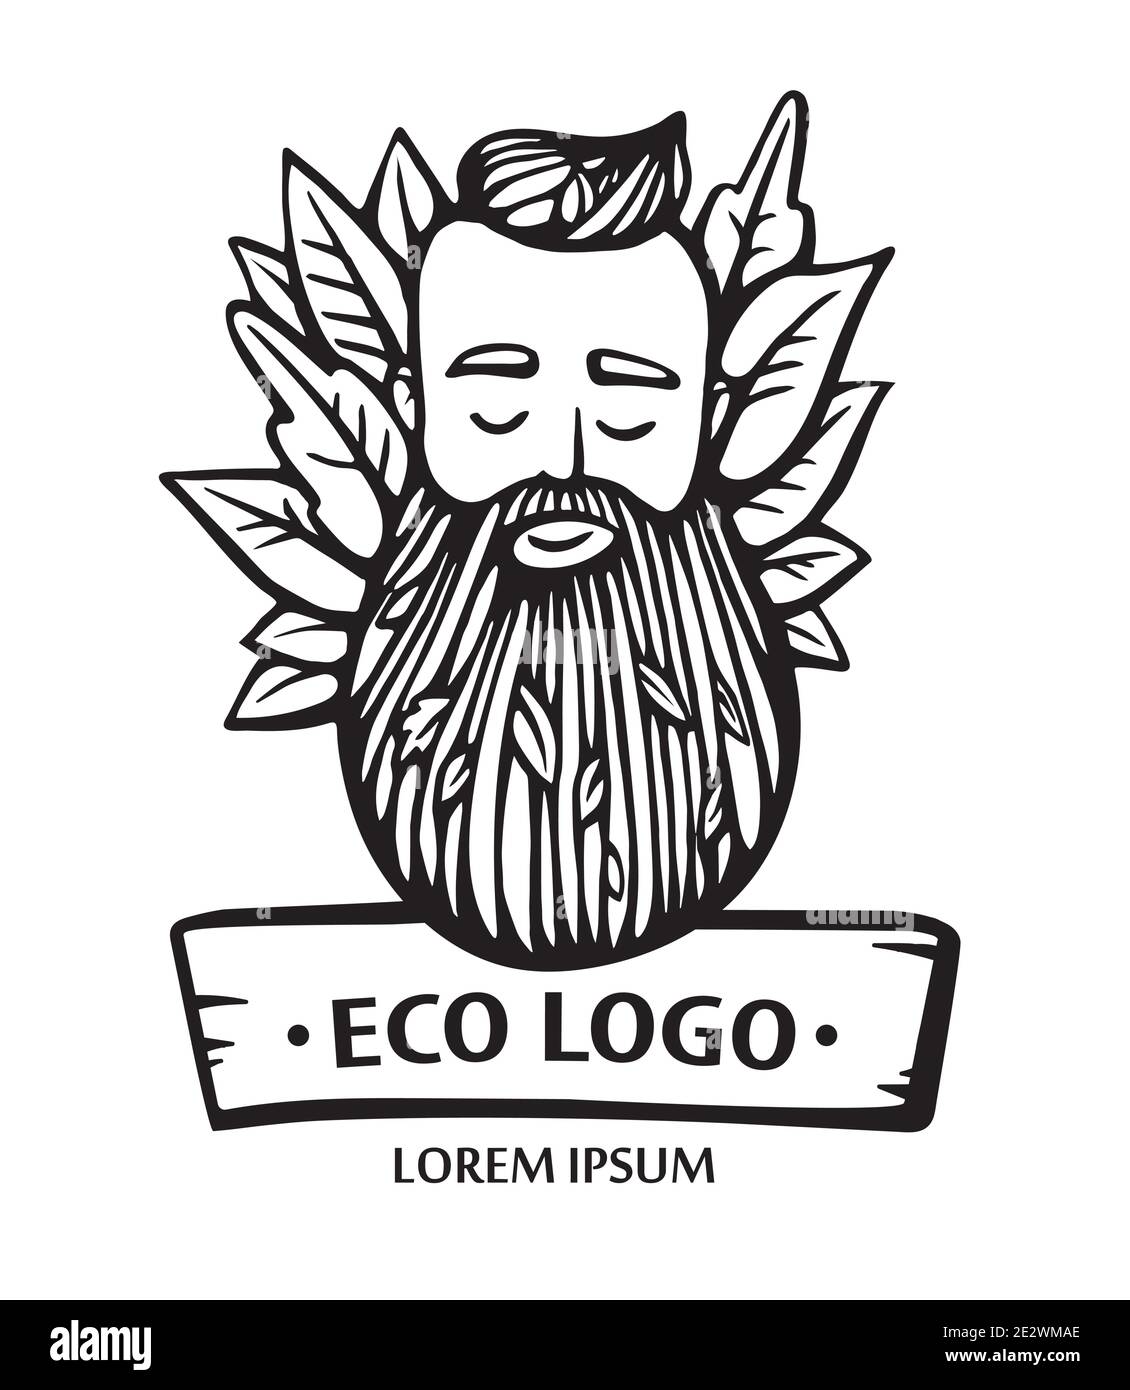 https://c8.alamy.com/comp/2E2WMAE/eco-nature-logo-hipster-head-with-blooming-beard-with-leafs-hand-drawn-vector-illustration-bearded-man-emblem-for-eco-products-2E2WMAE.jpg